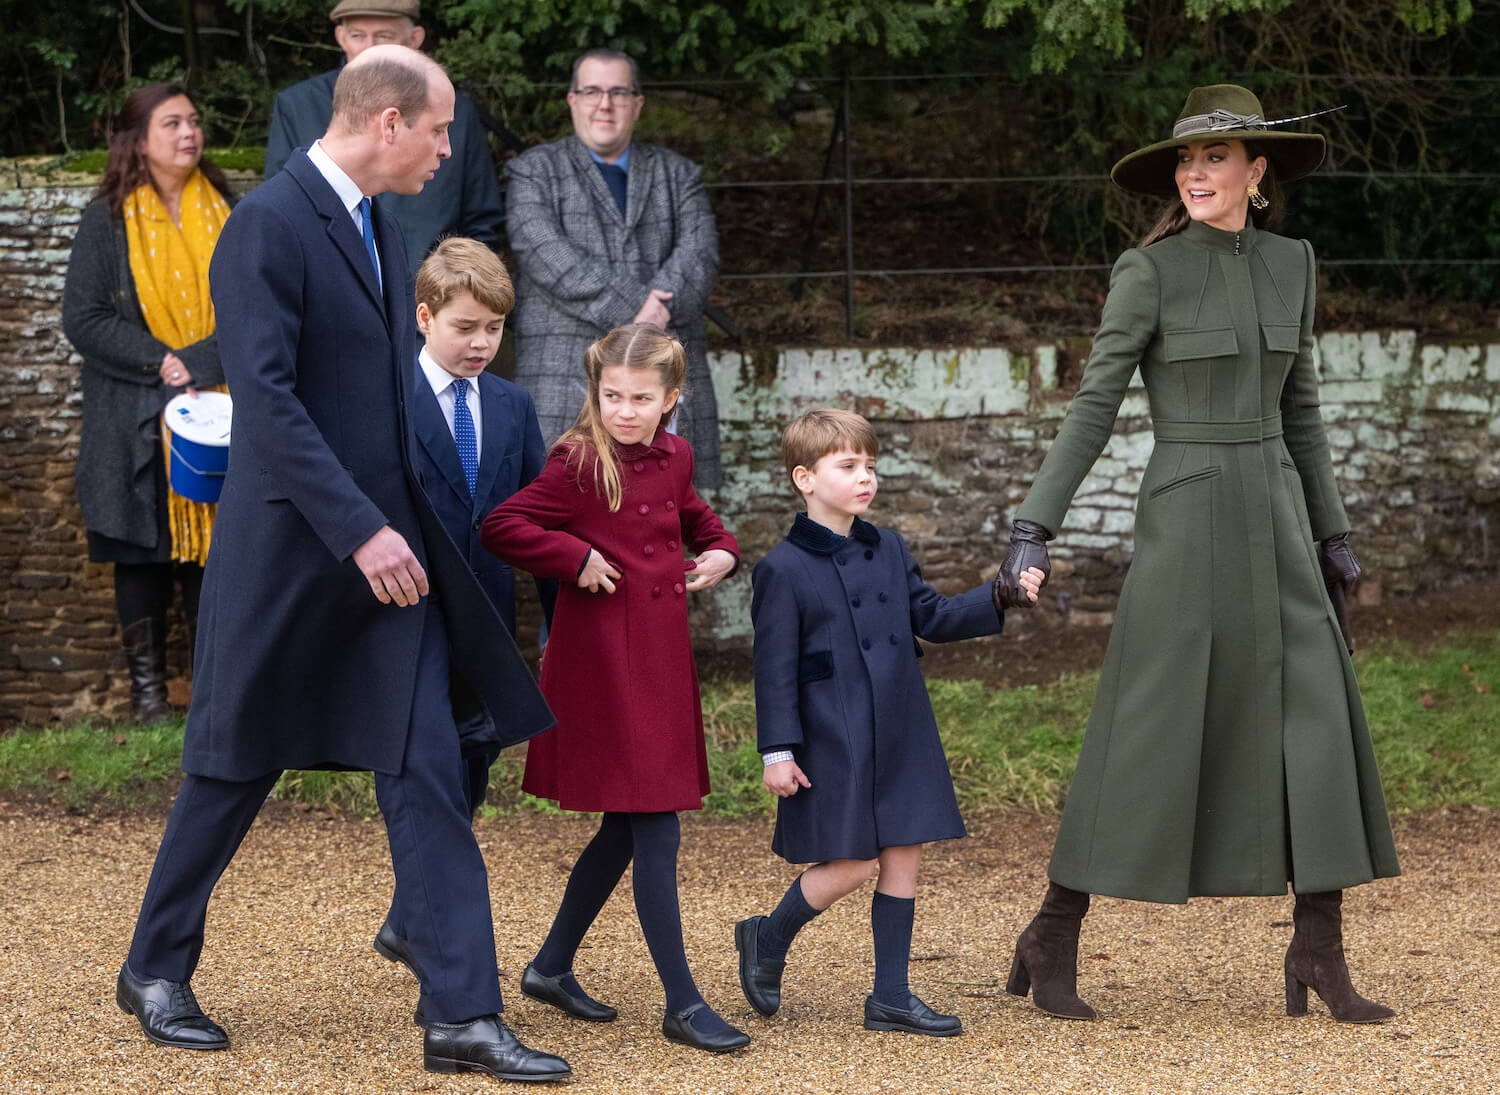 Prince William and Kate Middleton limit their kids' public appearances